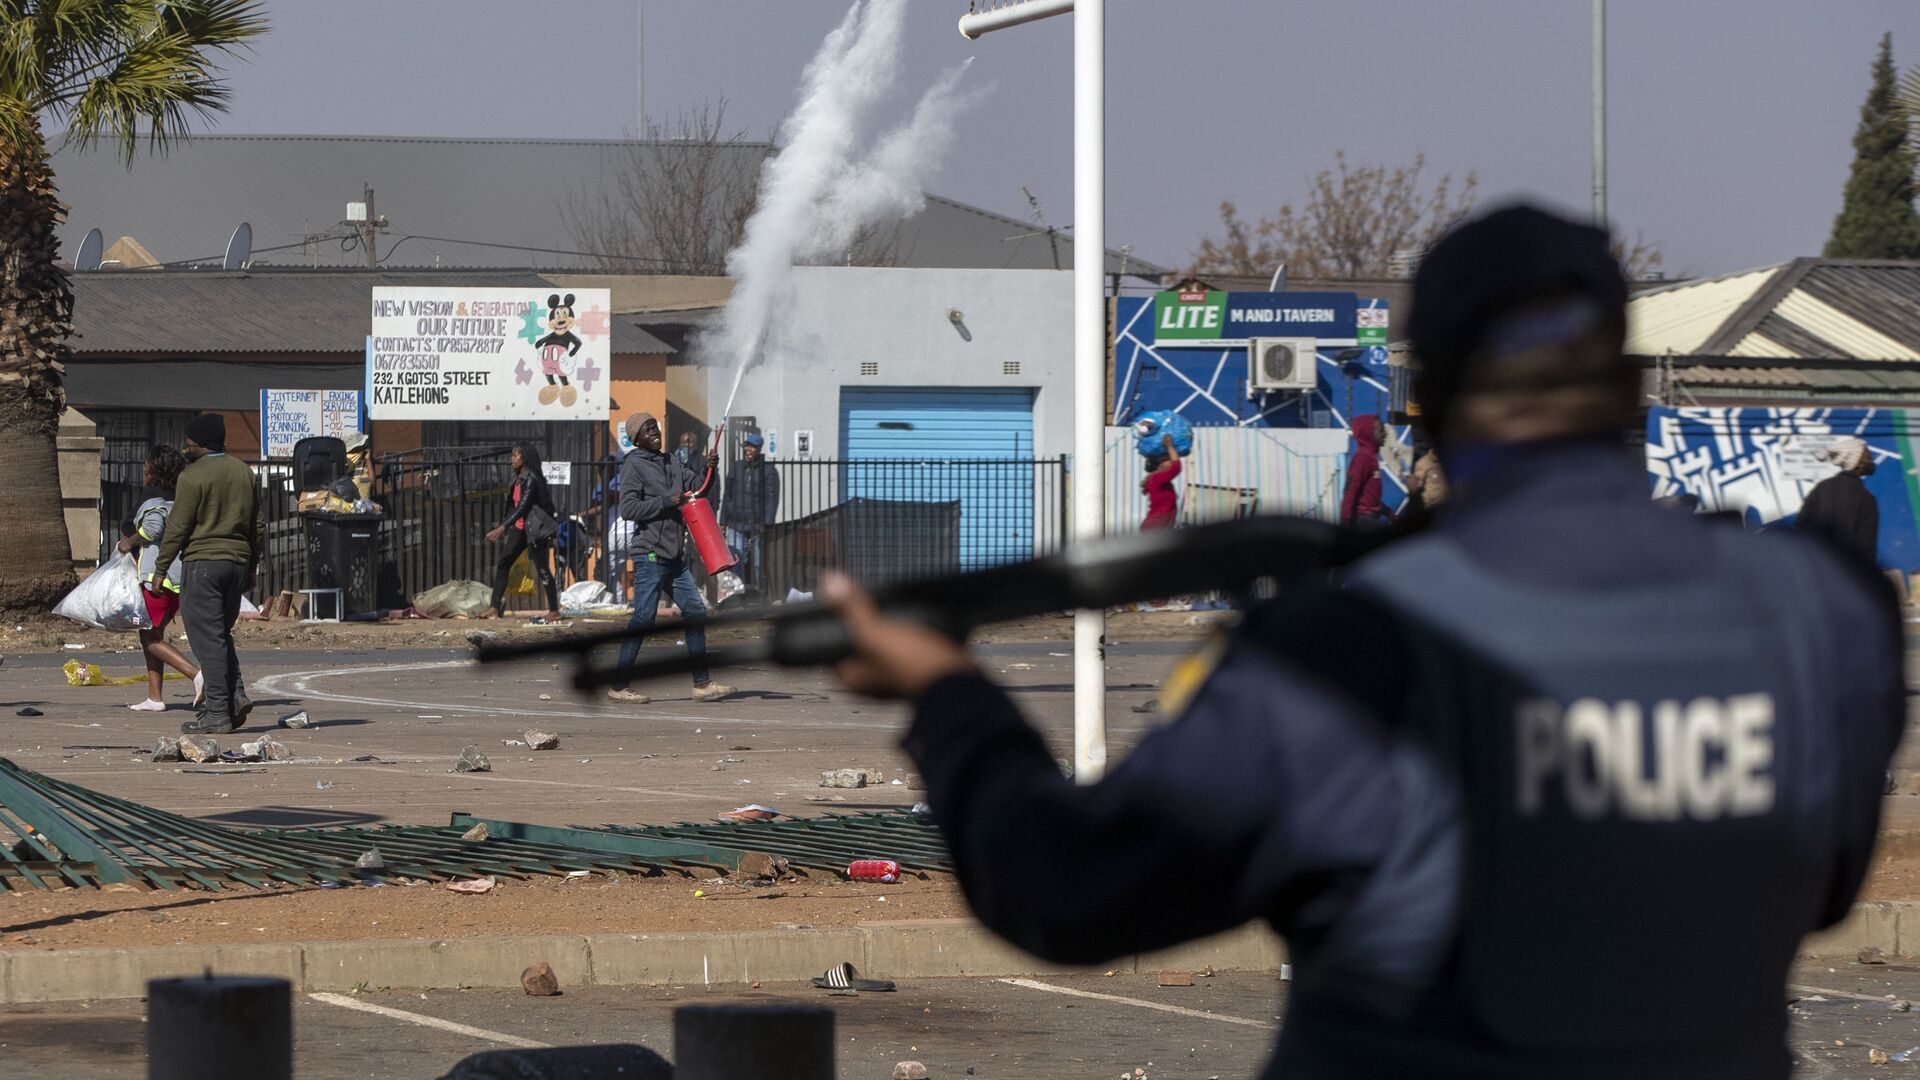 People throw stones at police as they attempt looting at Letsoho Shopping Centre in Katlehong, east of Johannesburg, South Africa, Monday, July 12, 2021. - Sputnik International, 1920, 12.07.2021